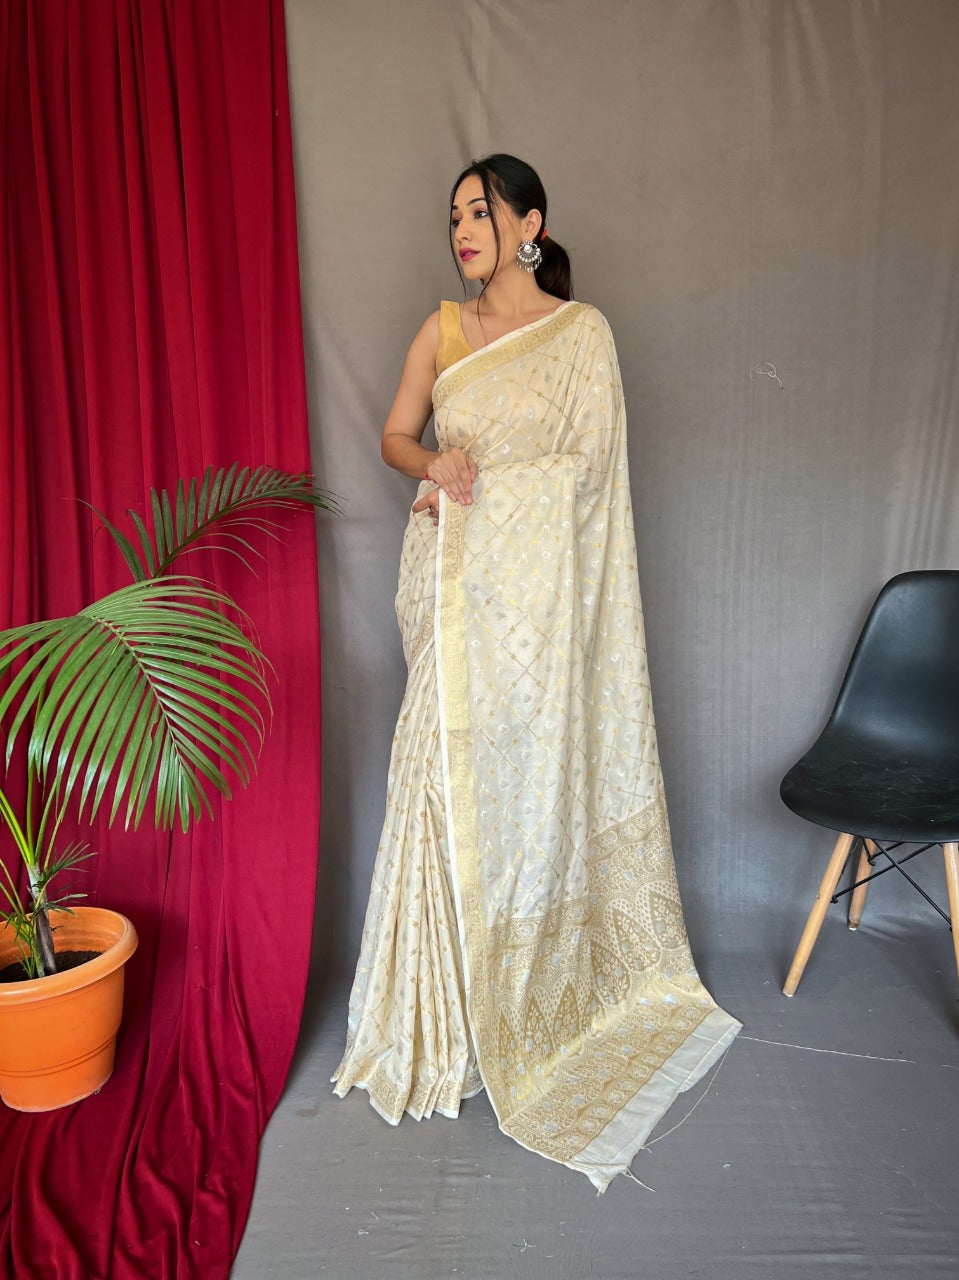 Women's Muslin Slk Saree With Soft Texture Golden And Silver Boarder - stavacreation